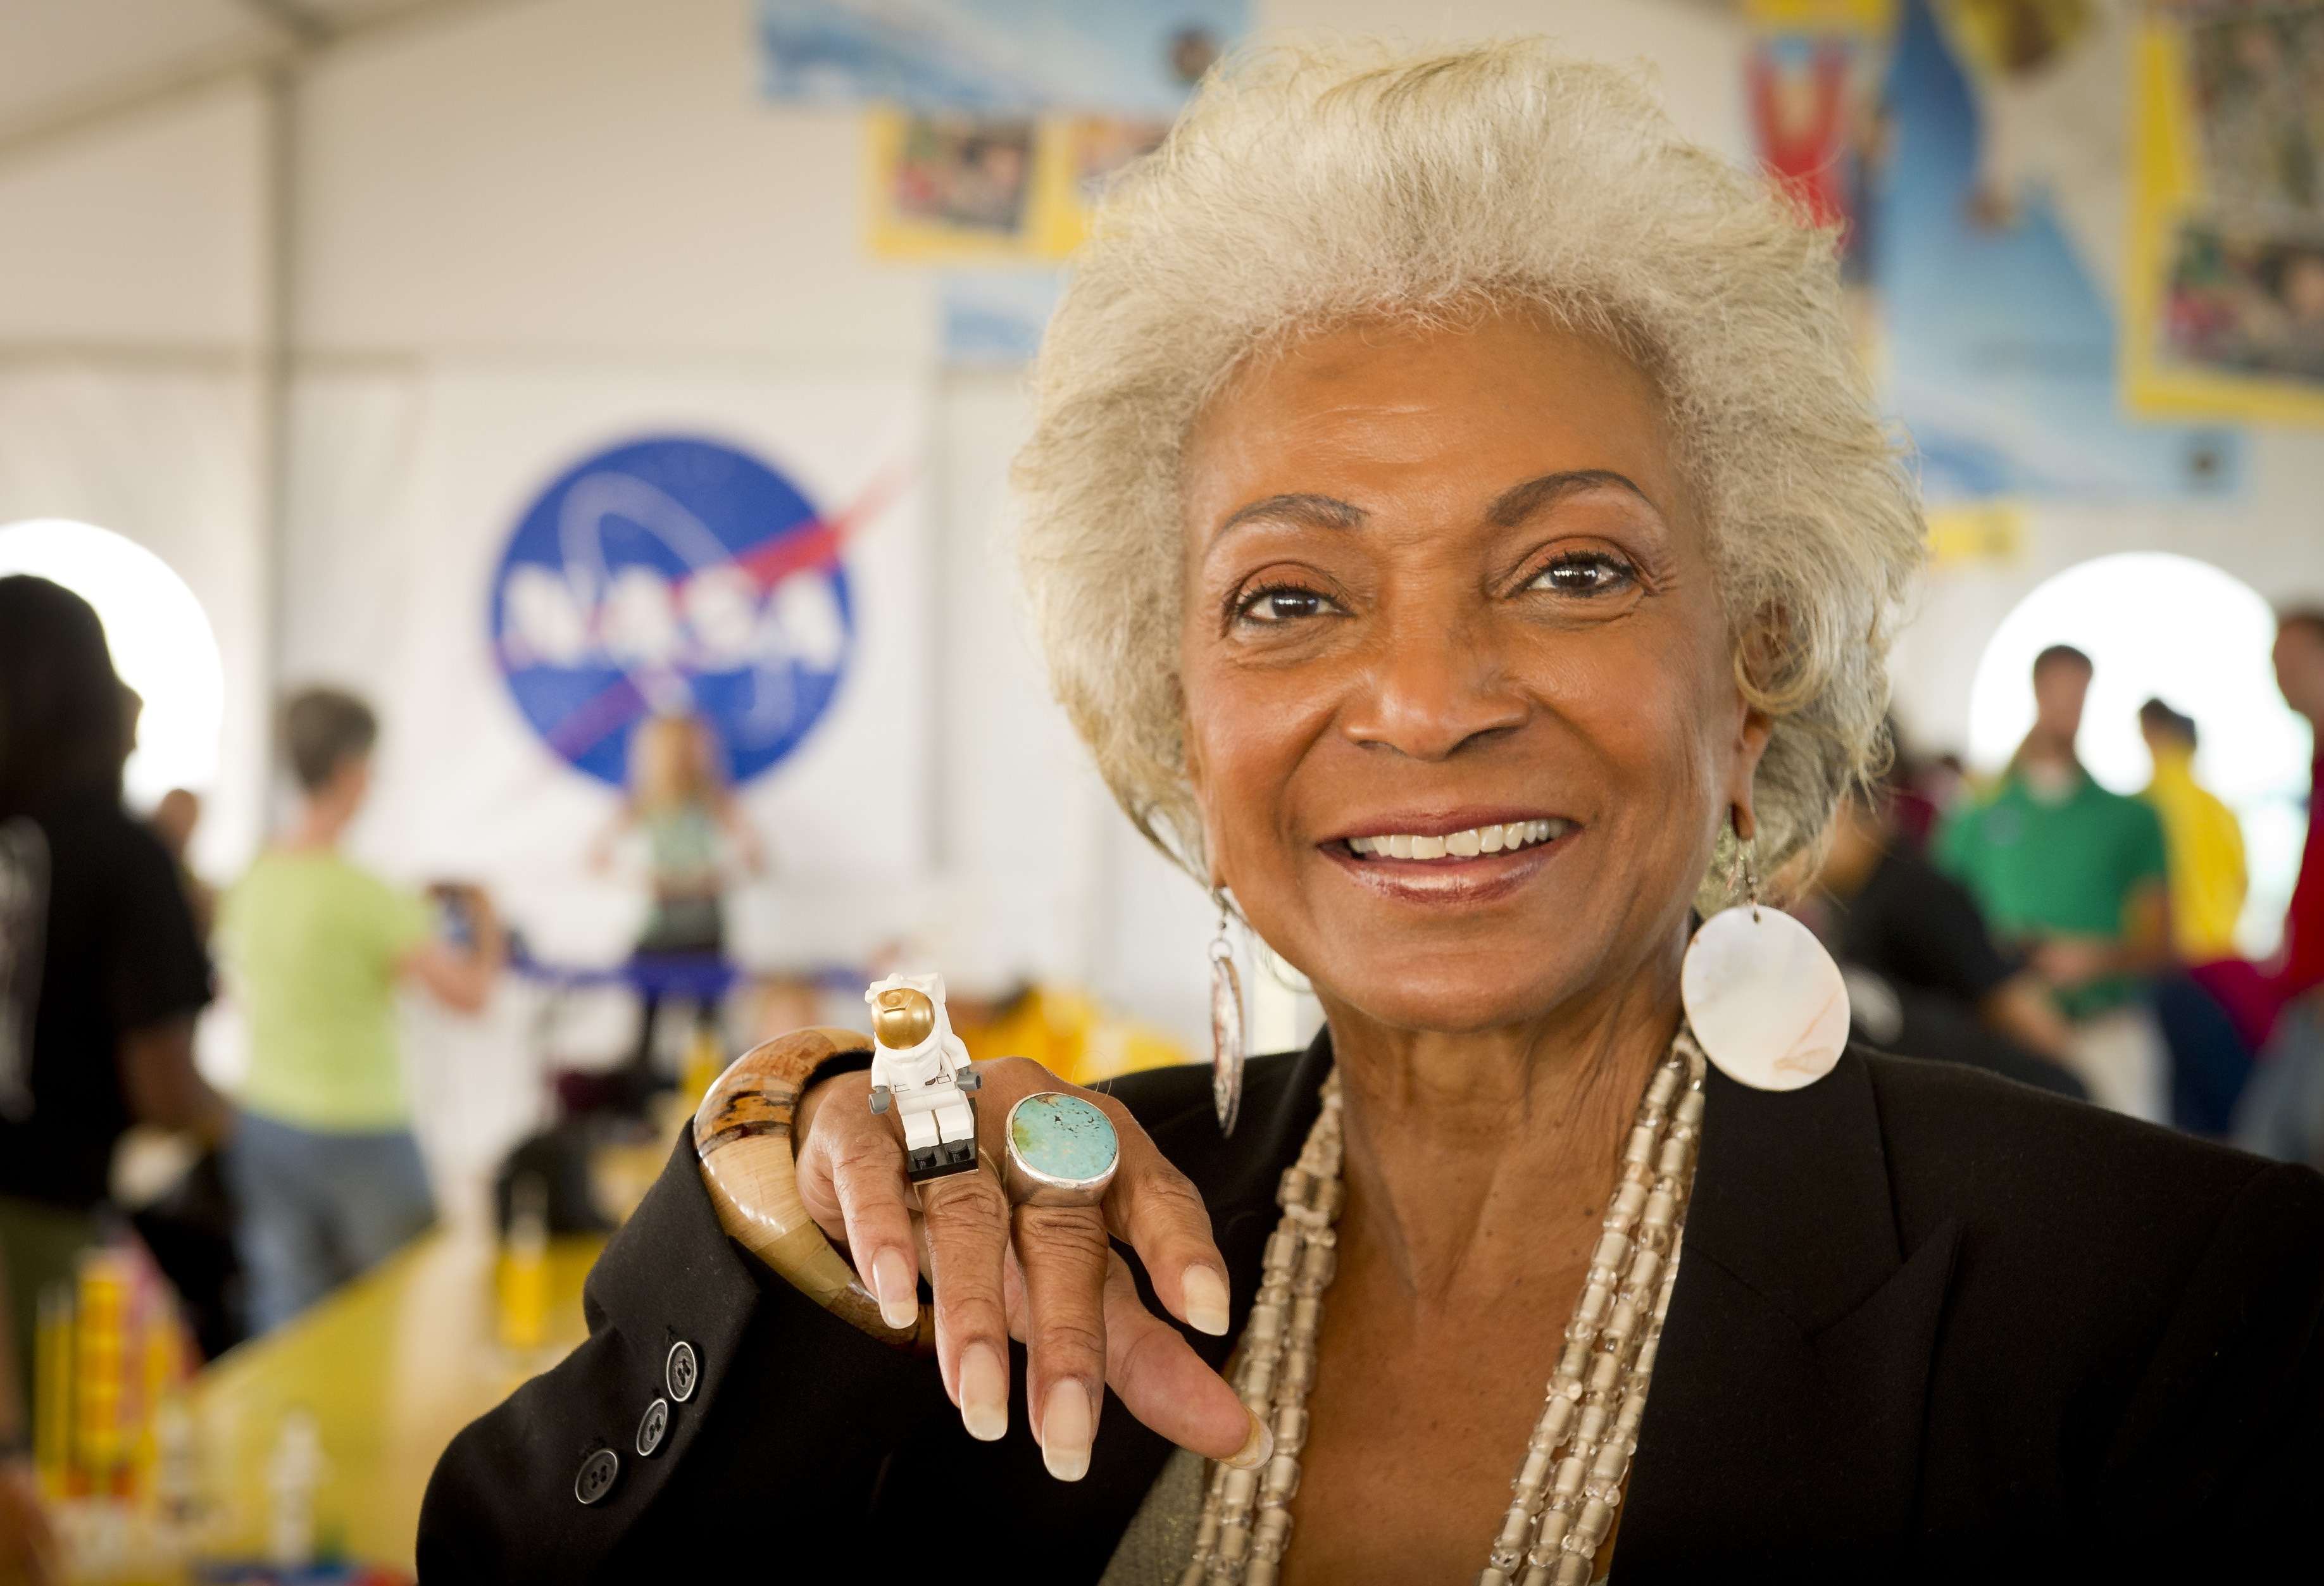 Nichelle Nichols’s role as communications officer Lieutenant Uhura on ‘Star Trek’ led to a long relationship with NASA as a recruiter and booster. In this November 2010 photo, she sports a Lego astronaut ring at NASA’s Kennedy Space Center in Cape Canaveral, Florida. Image courtesy of Wikimedia Commons, photo credit NASA/Bill Ingalls. This image is in the public domain in the United States because it was solely created by NASA.